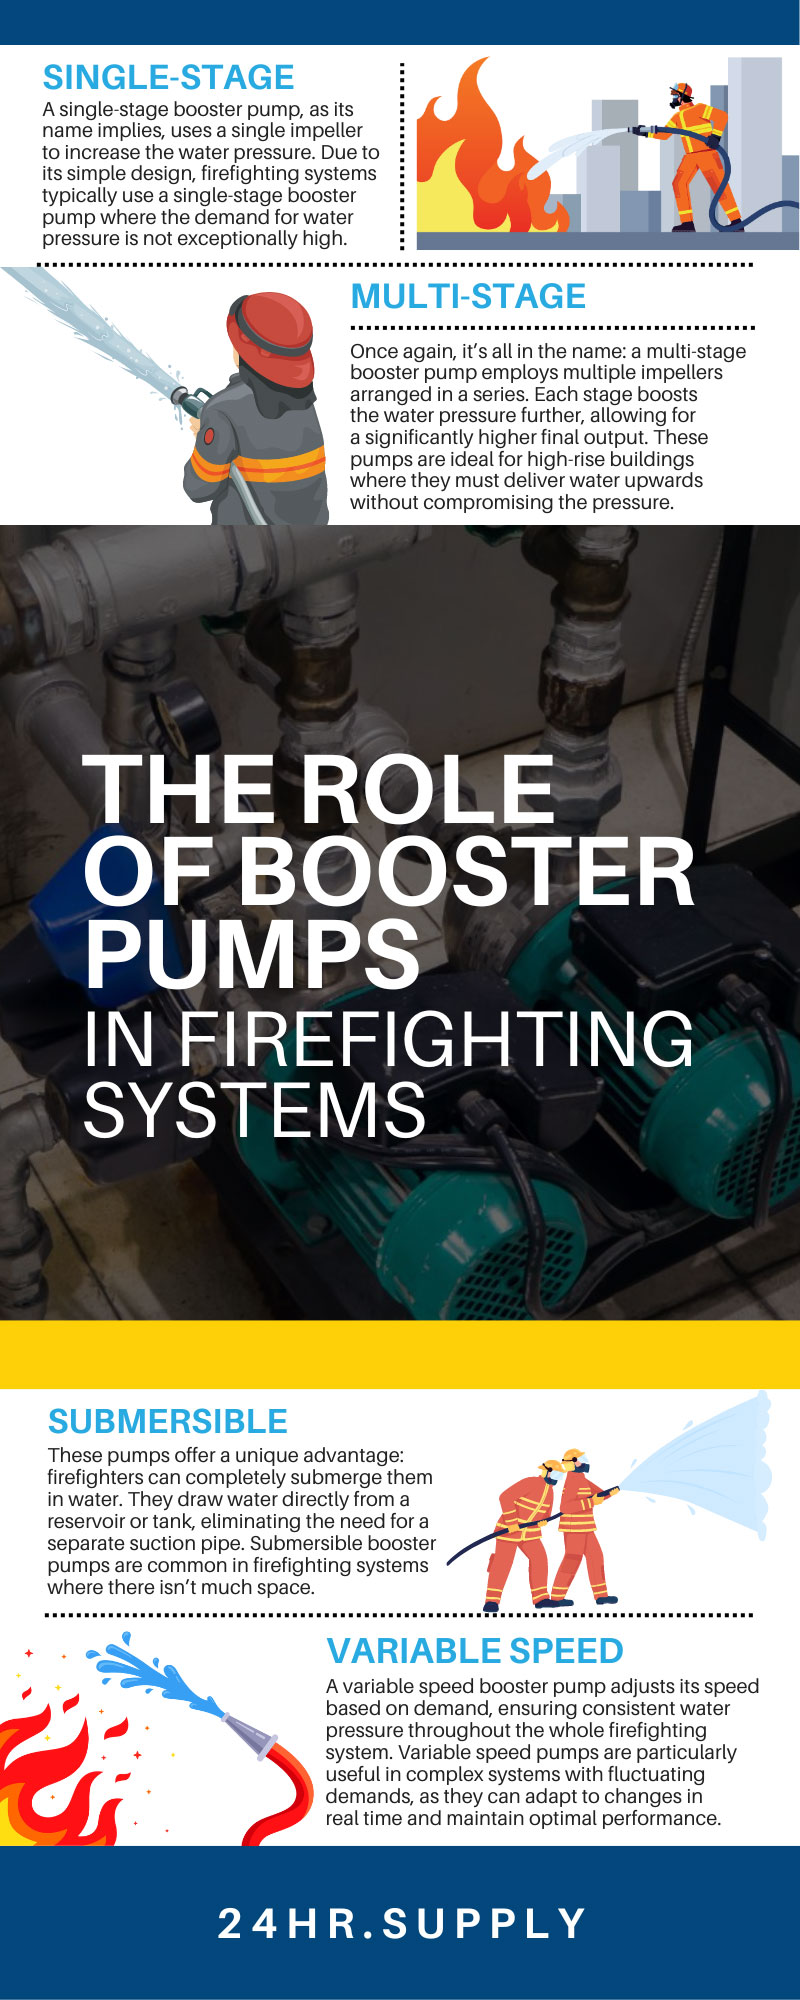 The Role of Booster Pumps in Firefighting Systems